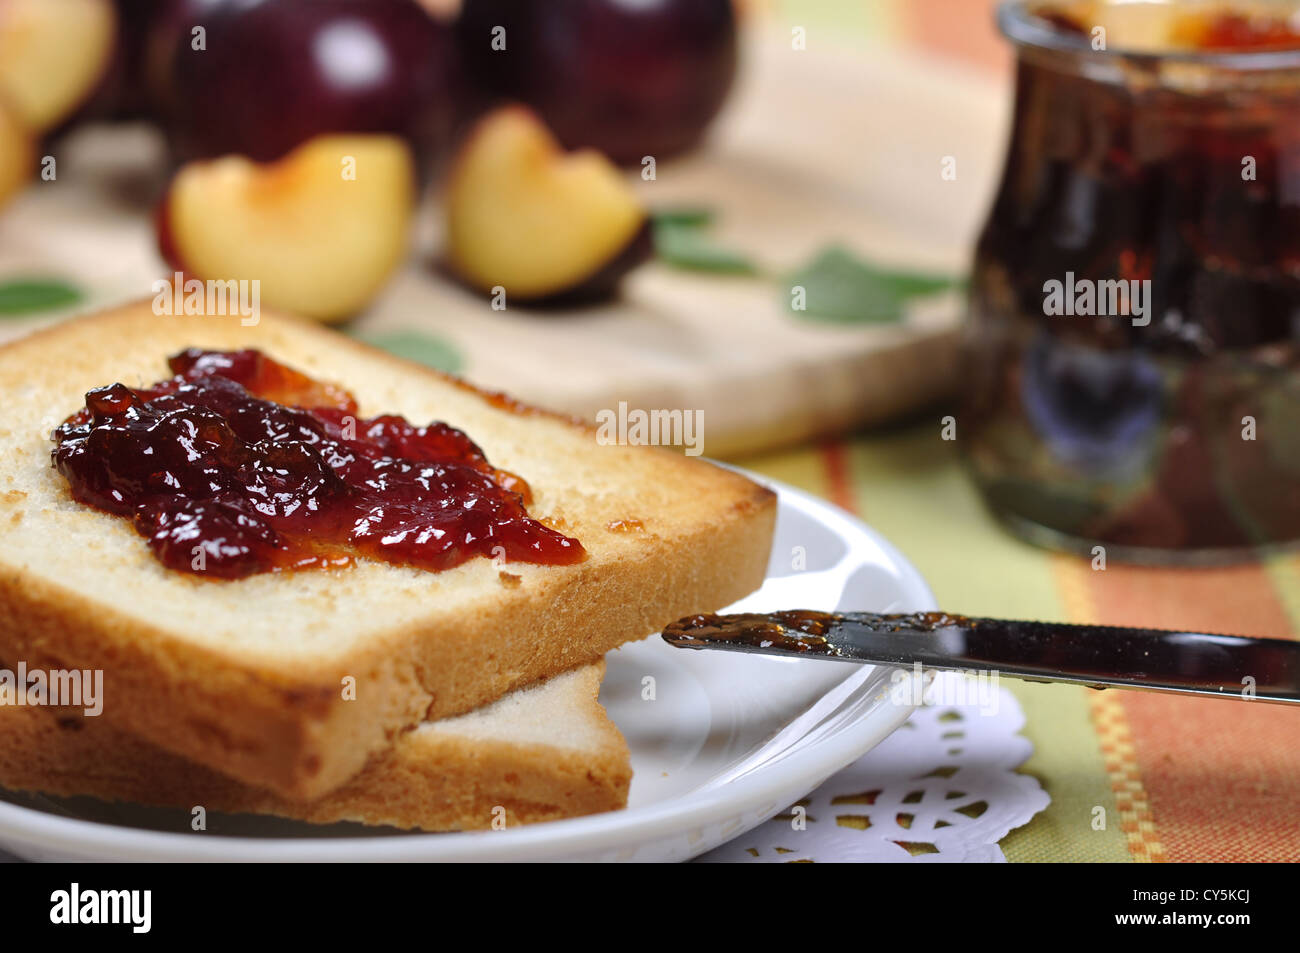 Plum jam with toast on white plate and fresh ripe plums. Small shallow dof.  Stock Photo